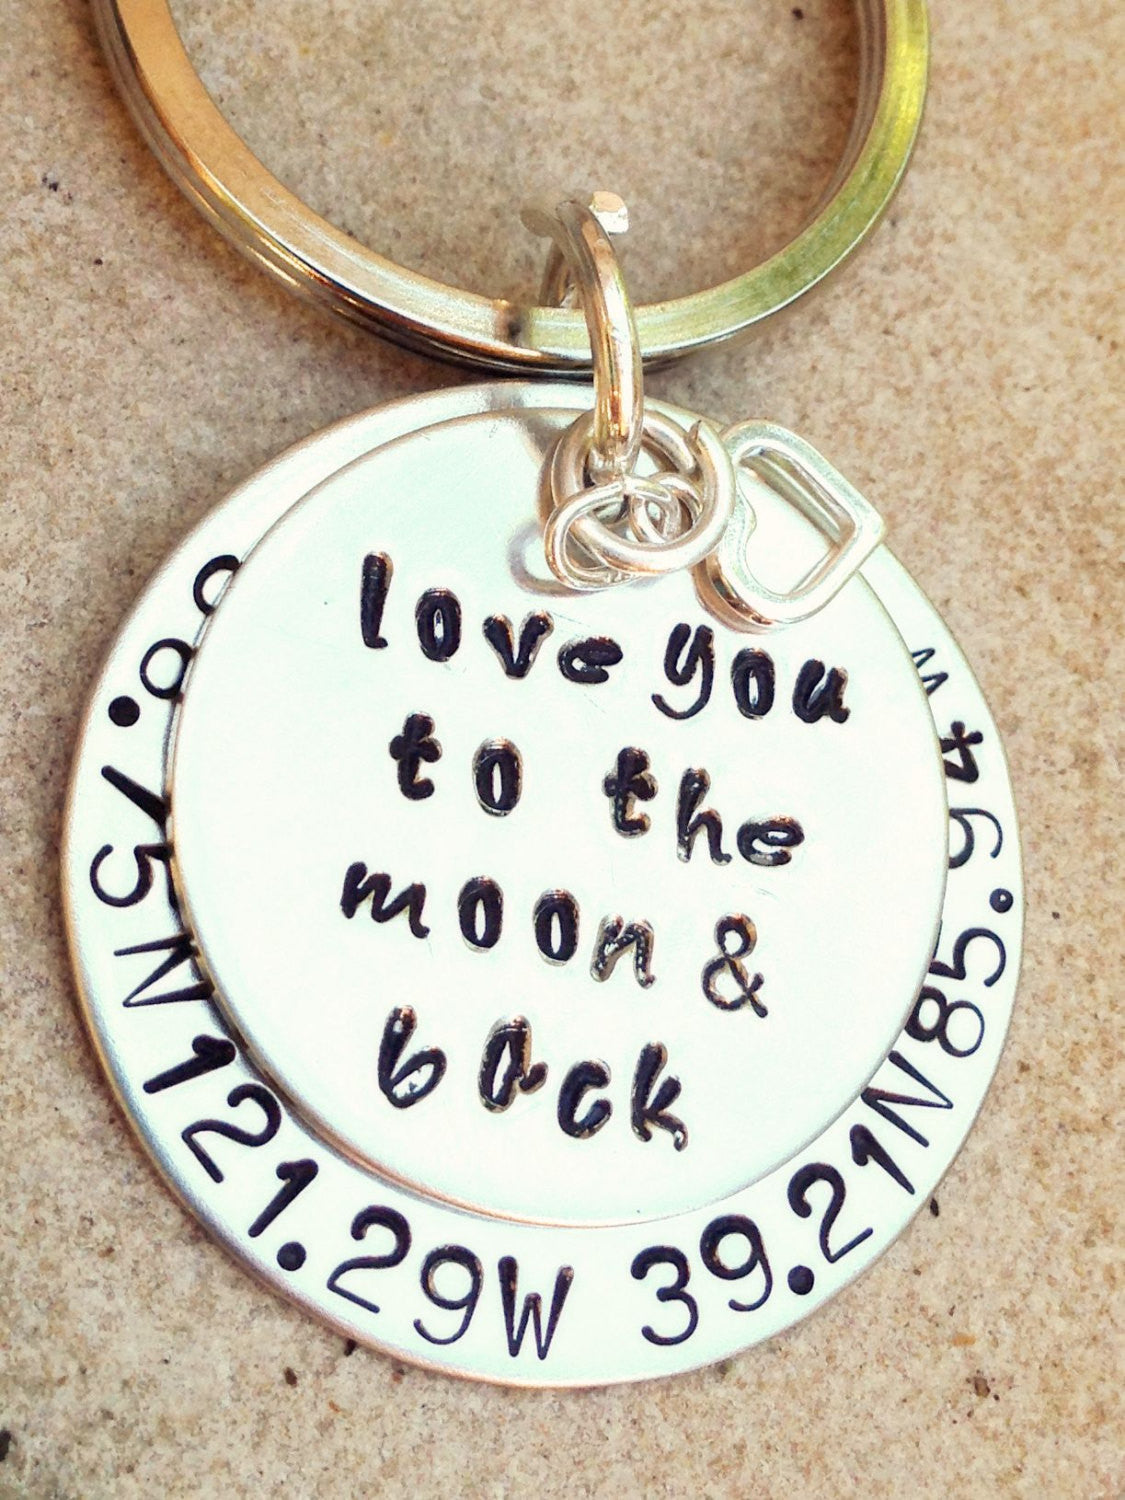 Father Gift, Boyfriend  Gift, keychain, key chain, love you to the moon and back, coordinate keychain, gifts for men, natashaaloha - Natashaaloha, jewelry, bracelets, necklace, keychains, fishing lures, gifts for men, charms, personalized, 